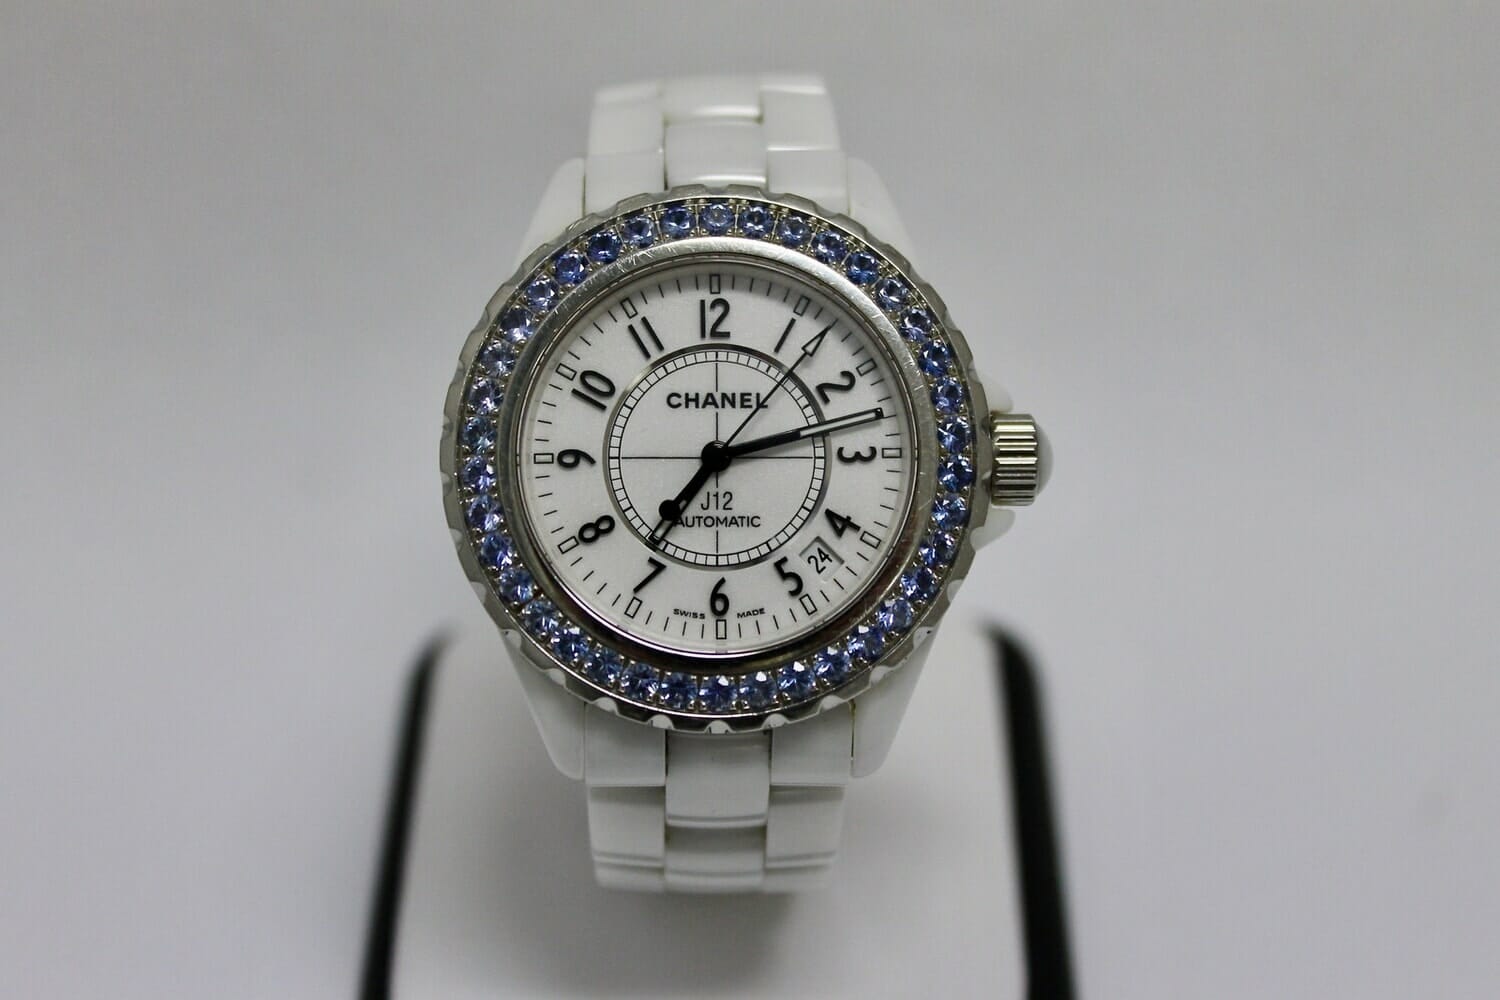 H1182 Chanel J 12 - White Large Size with Sapphires